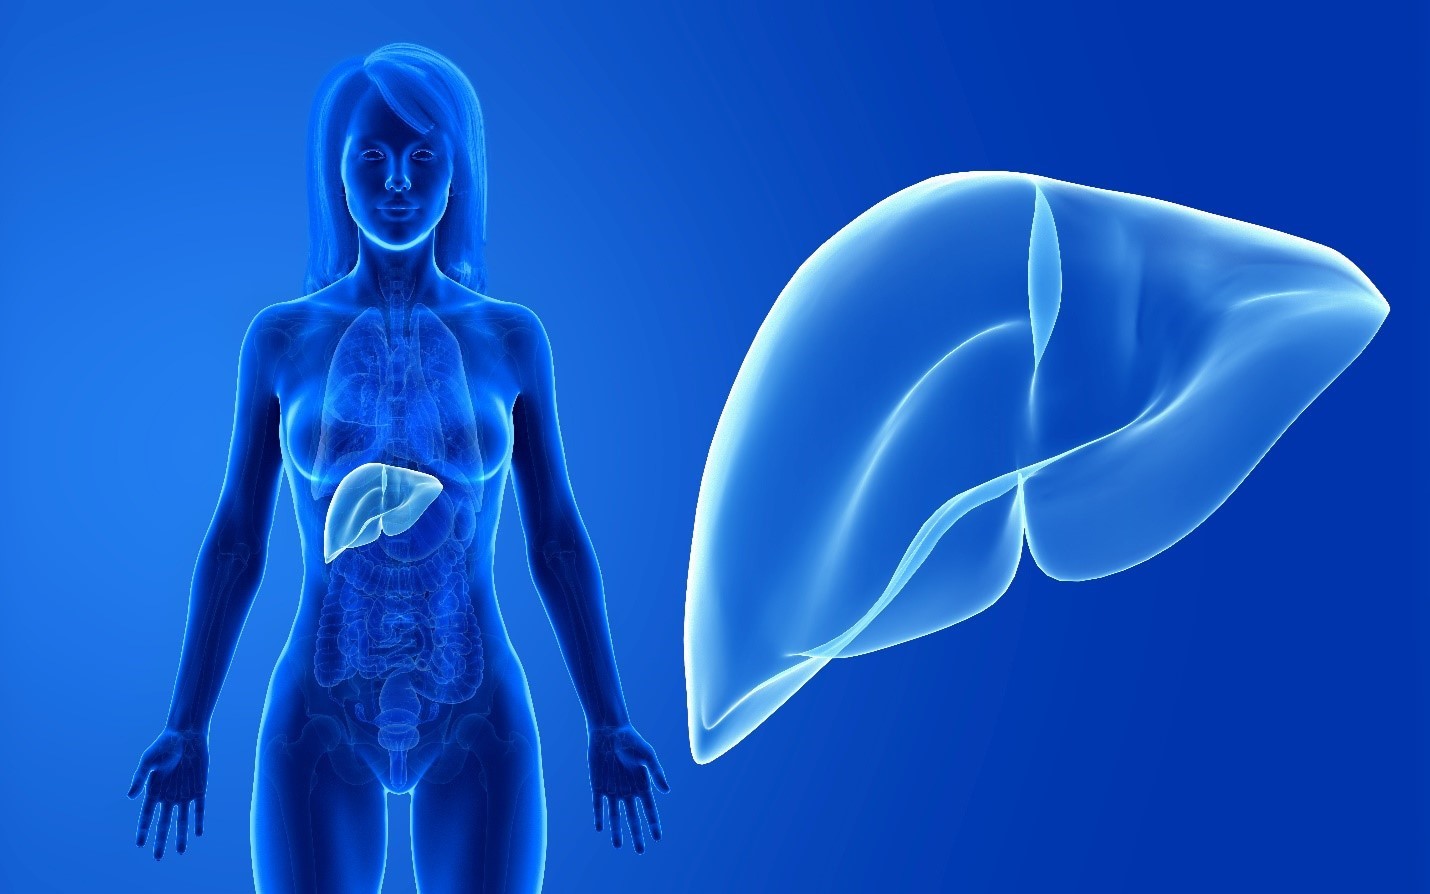 Liver Health - Support the Body's Detox System